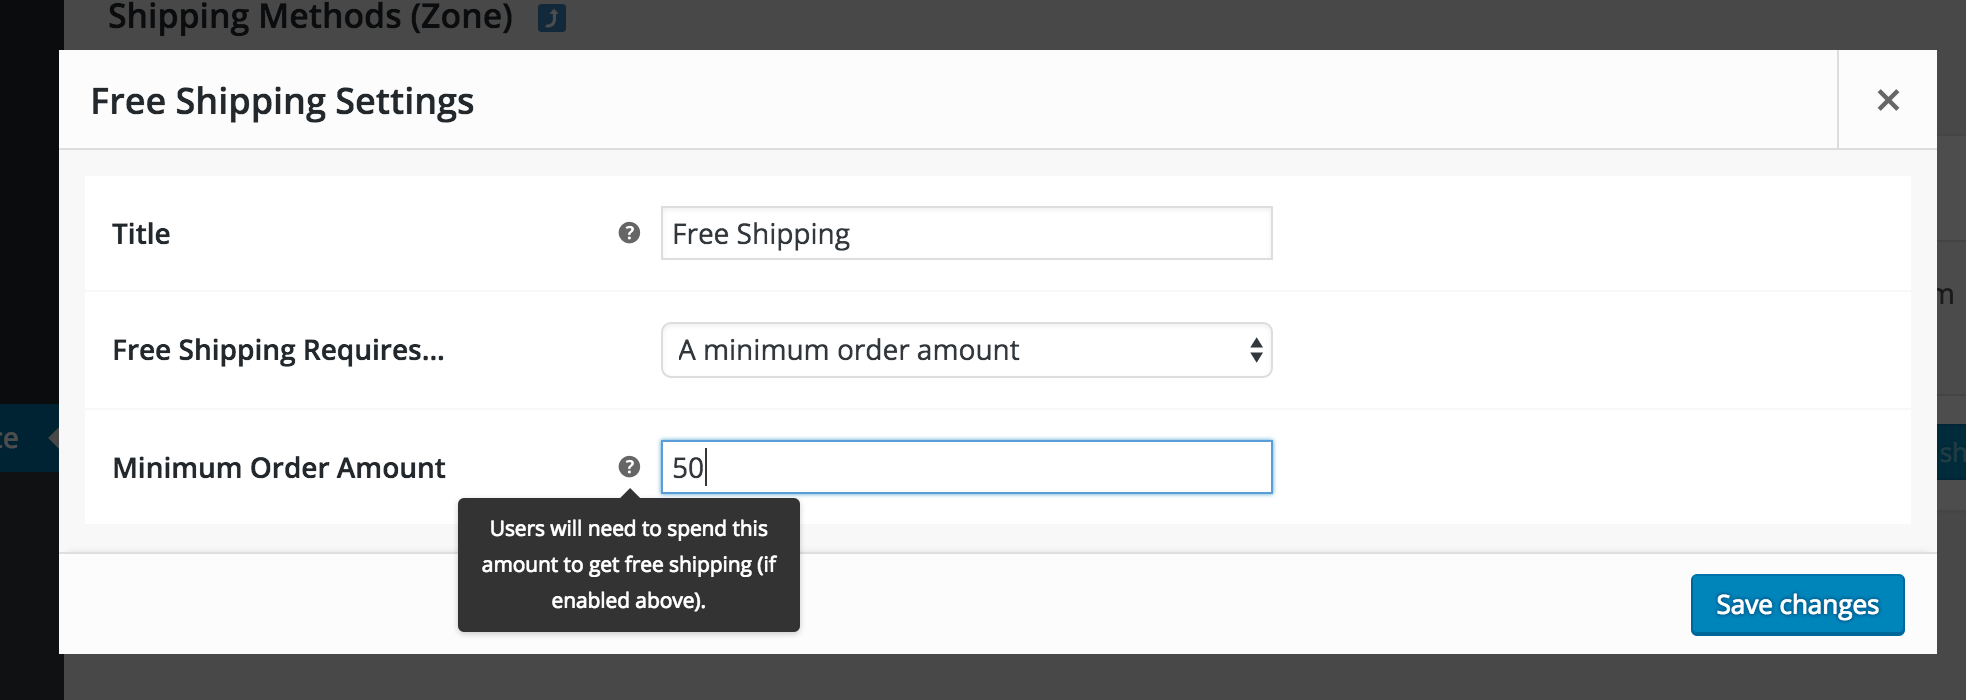 Adding free shipping as an option for United States customers in WooCommerce, but only if they spend $50 or more.